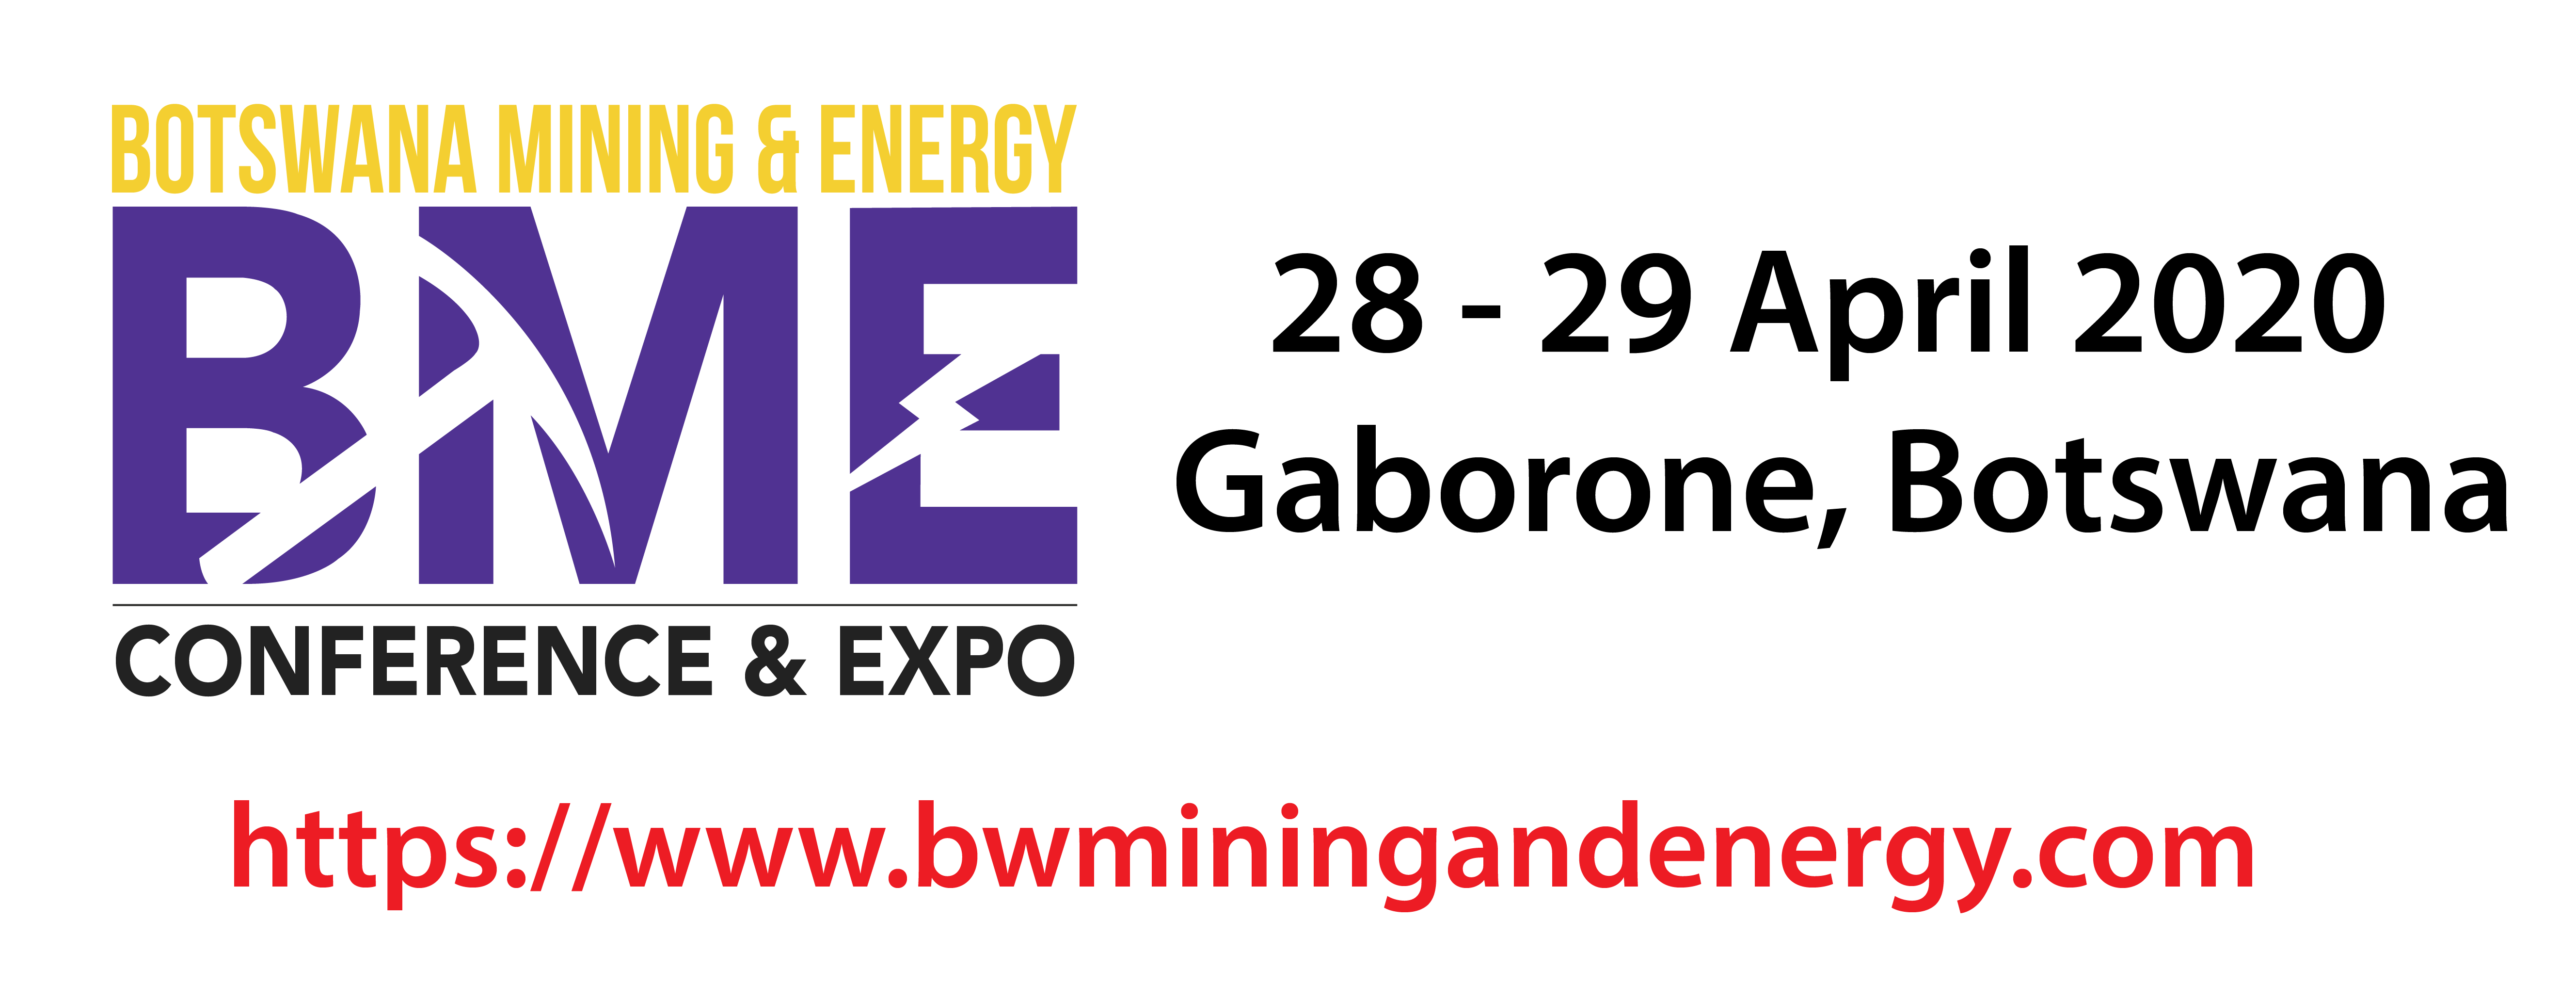 Botswana Mining & Energy Expo and Conference (BME)